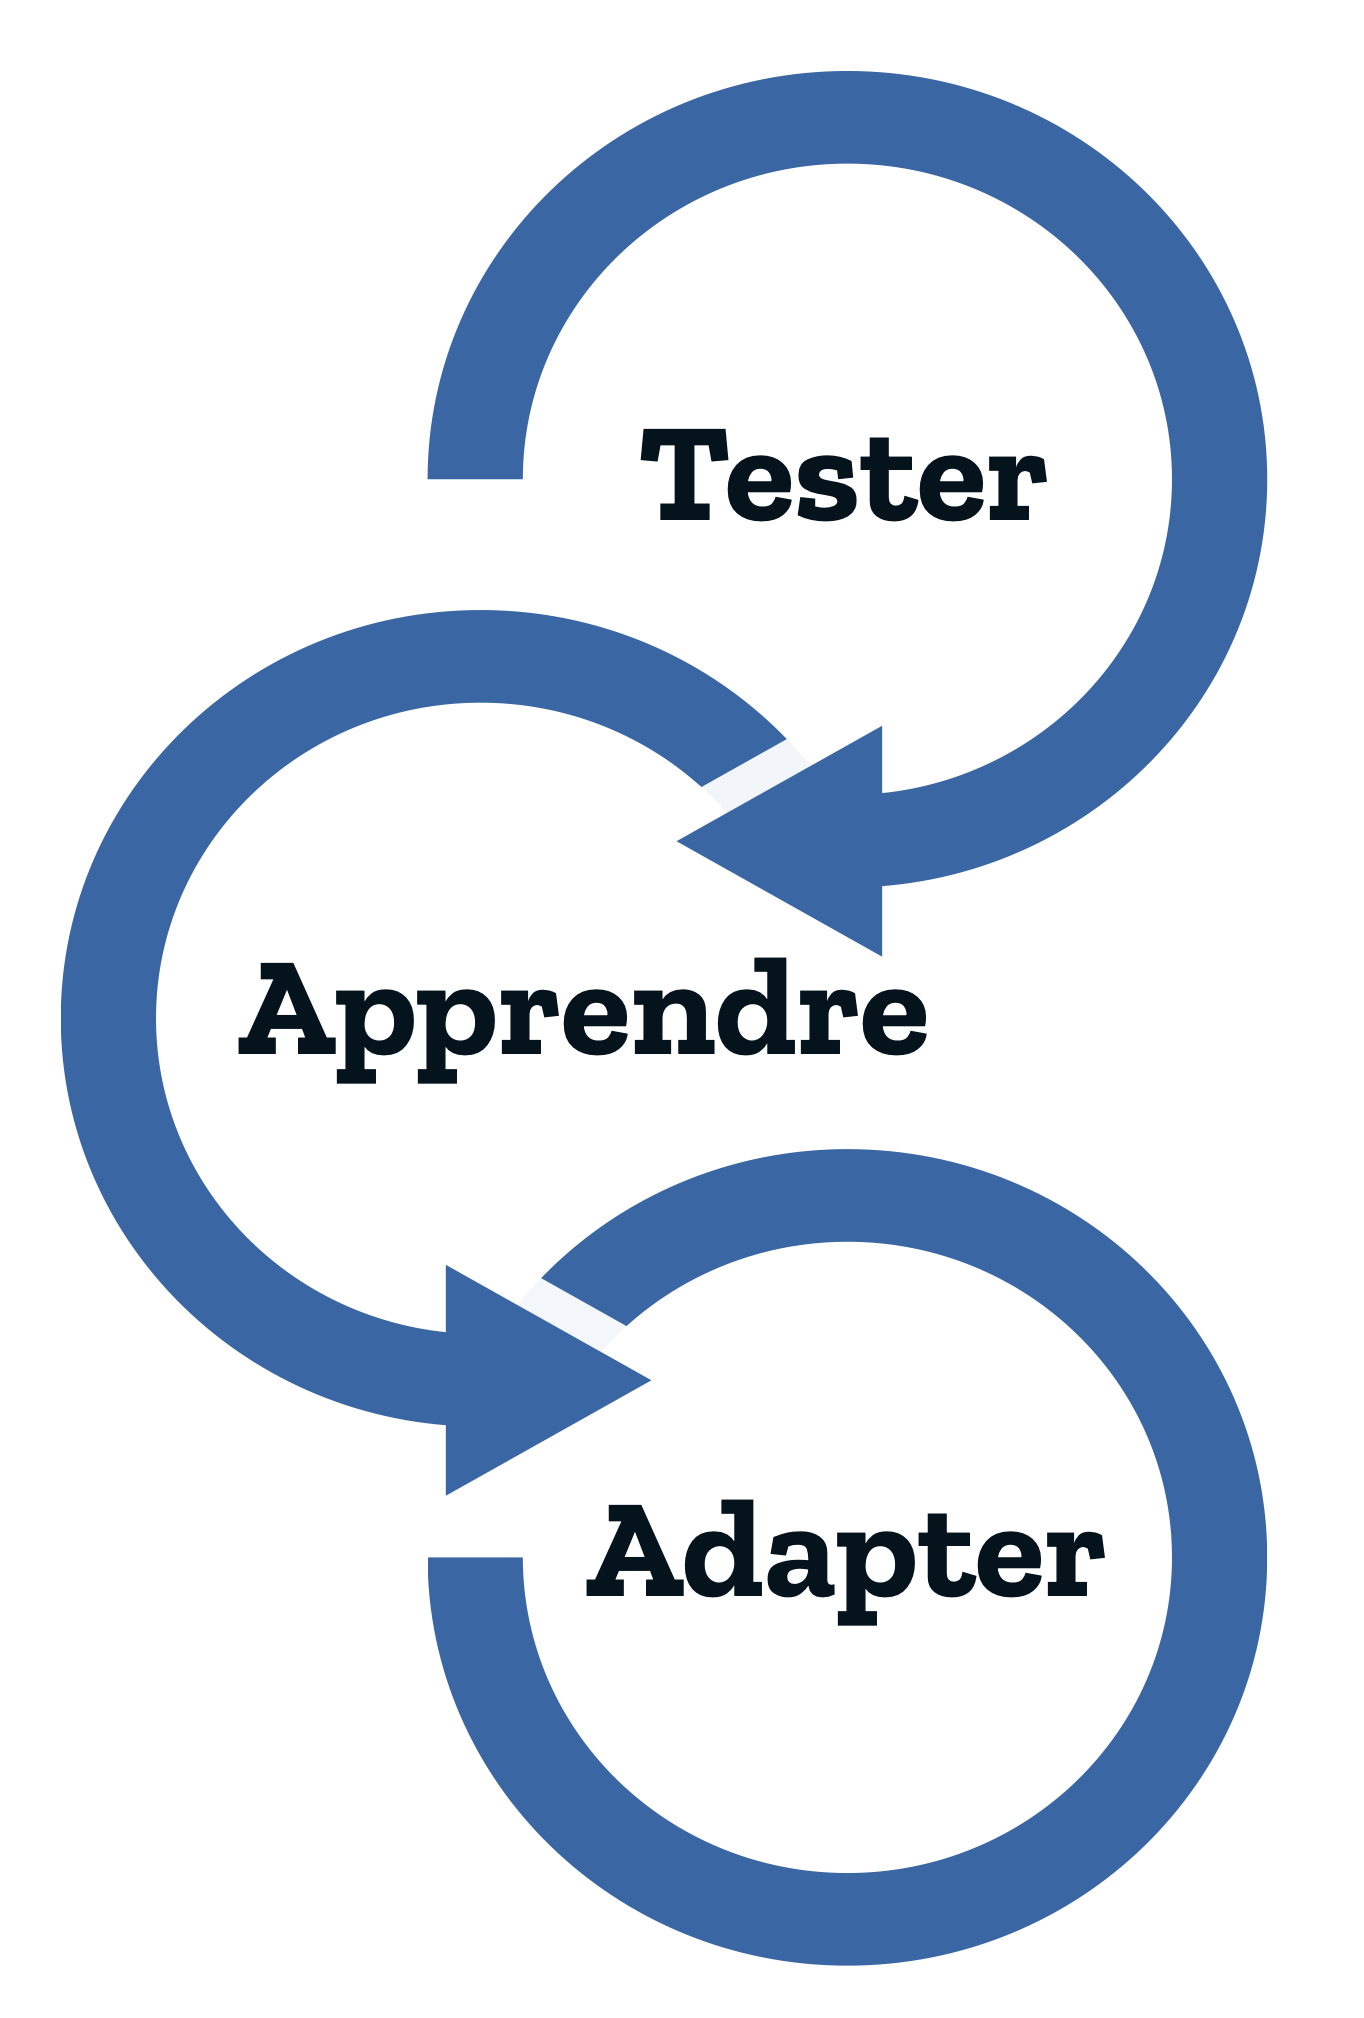 Tester Appendre Adapter